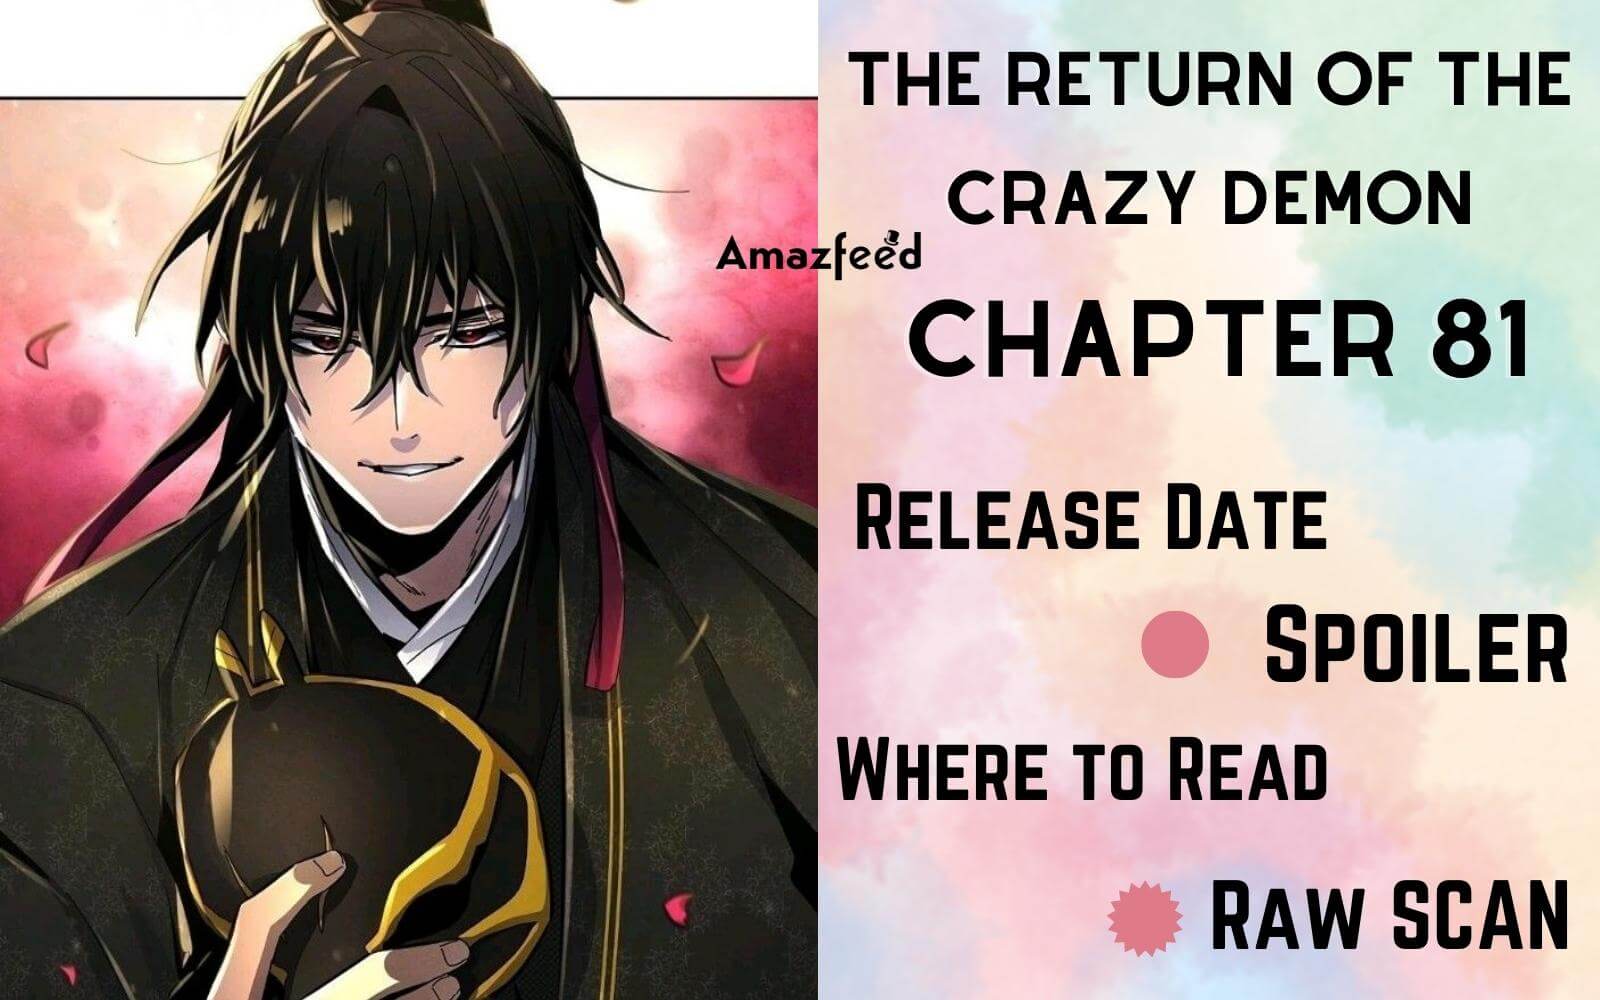 Blue Lock Chapter 239 Spoiler, Release Date, Raw Scan, Count Down, Color  Page & More » Amazfeed